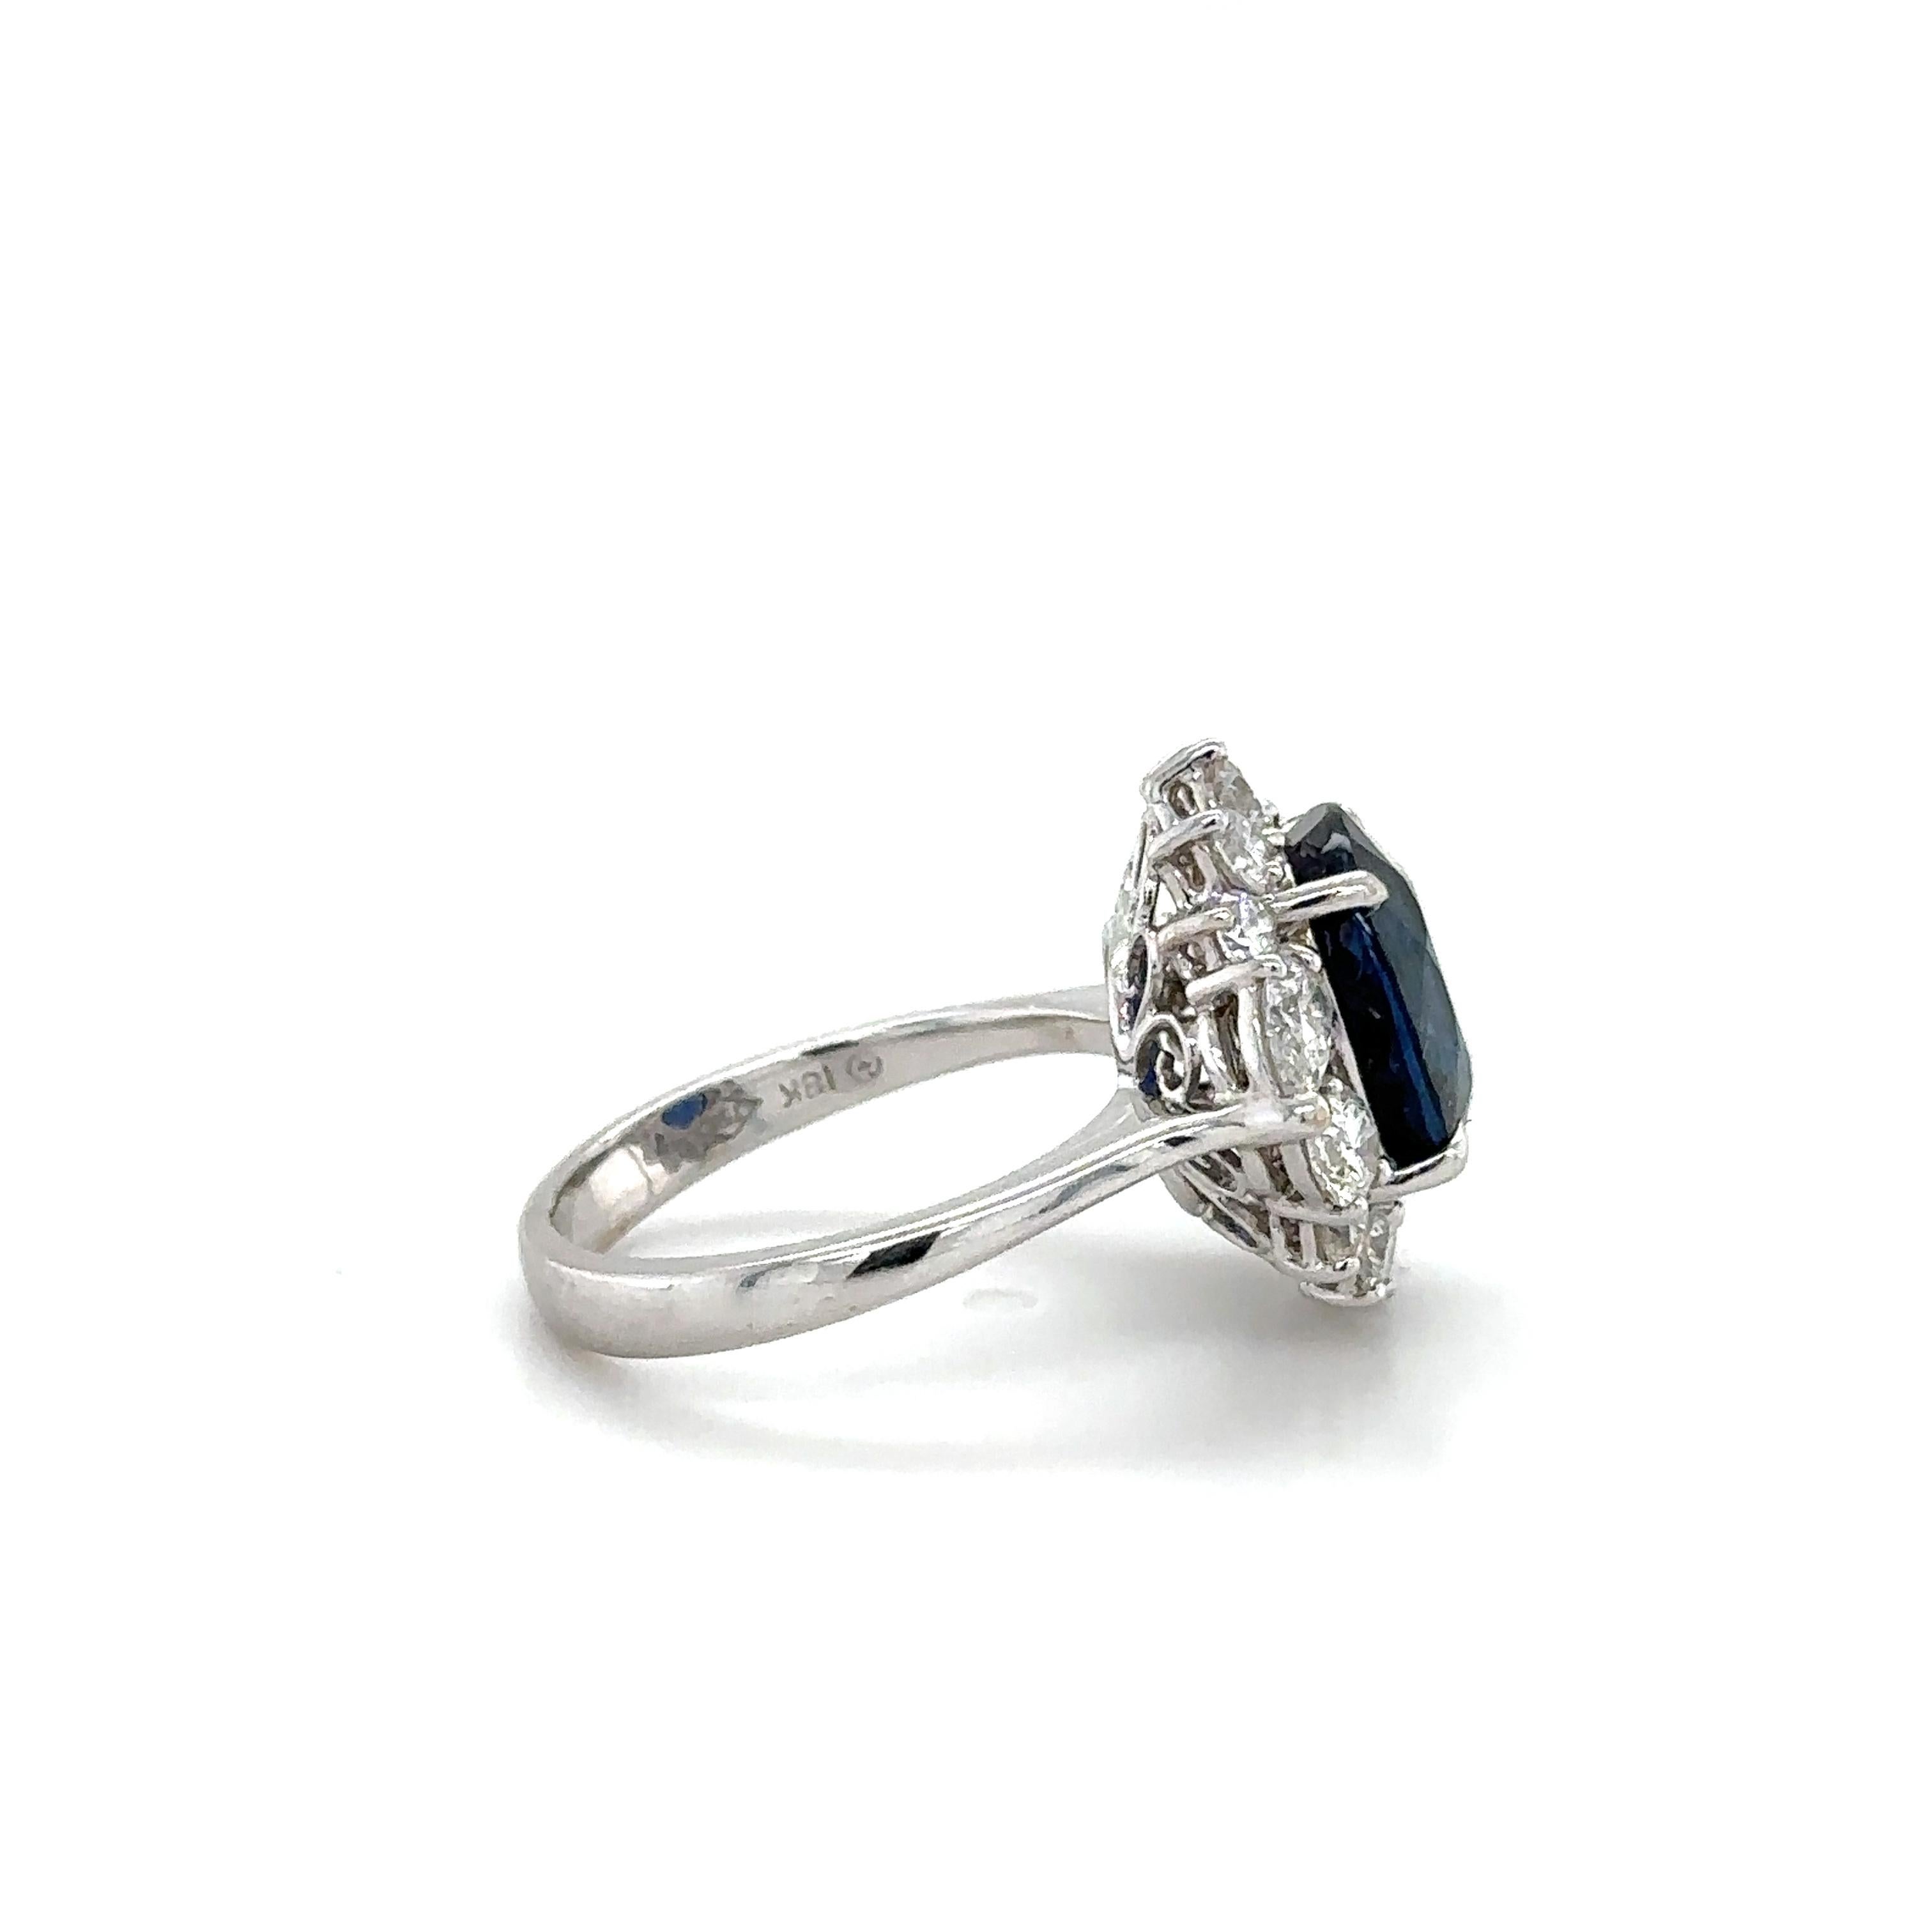 A stunning exquisite ring set in 18k white gold, showcasing a remarkable 5.10ct. oval-cut Sapphire encircled by a total of 0.56ct pear-shaped diamonds and 0.63ct round brilliant cut diamonds.

The lustrously stunning Sapphire is graded as 